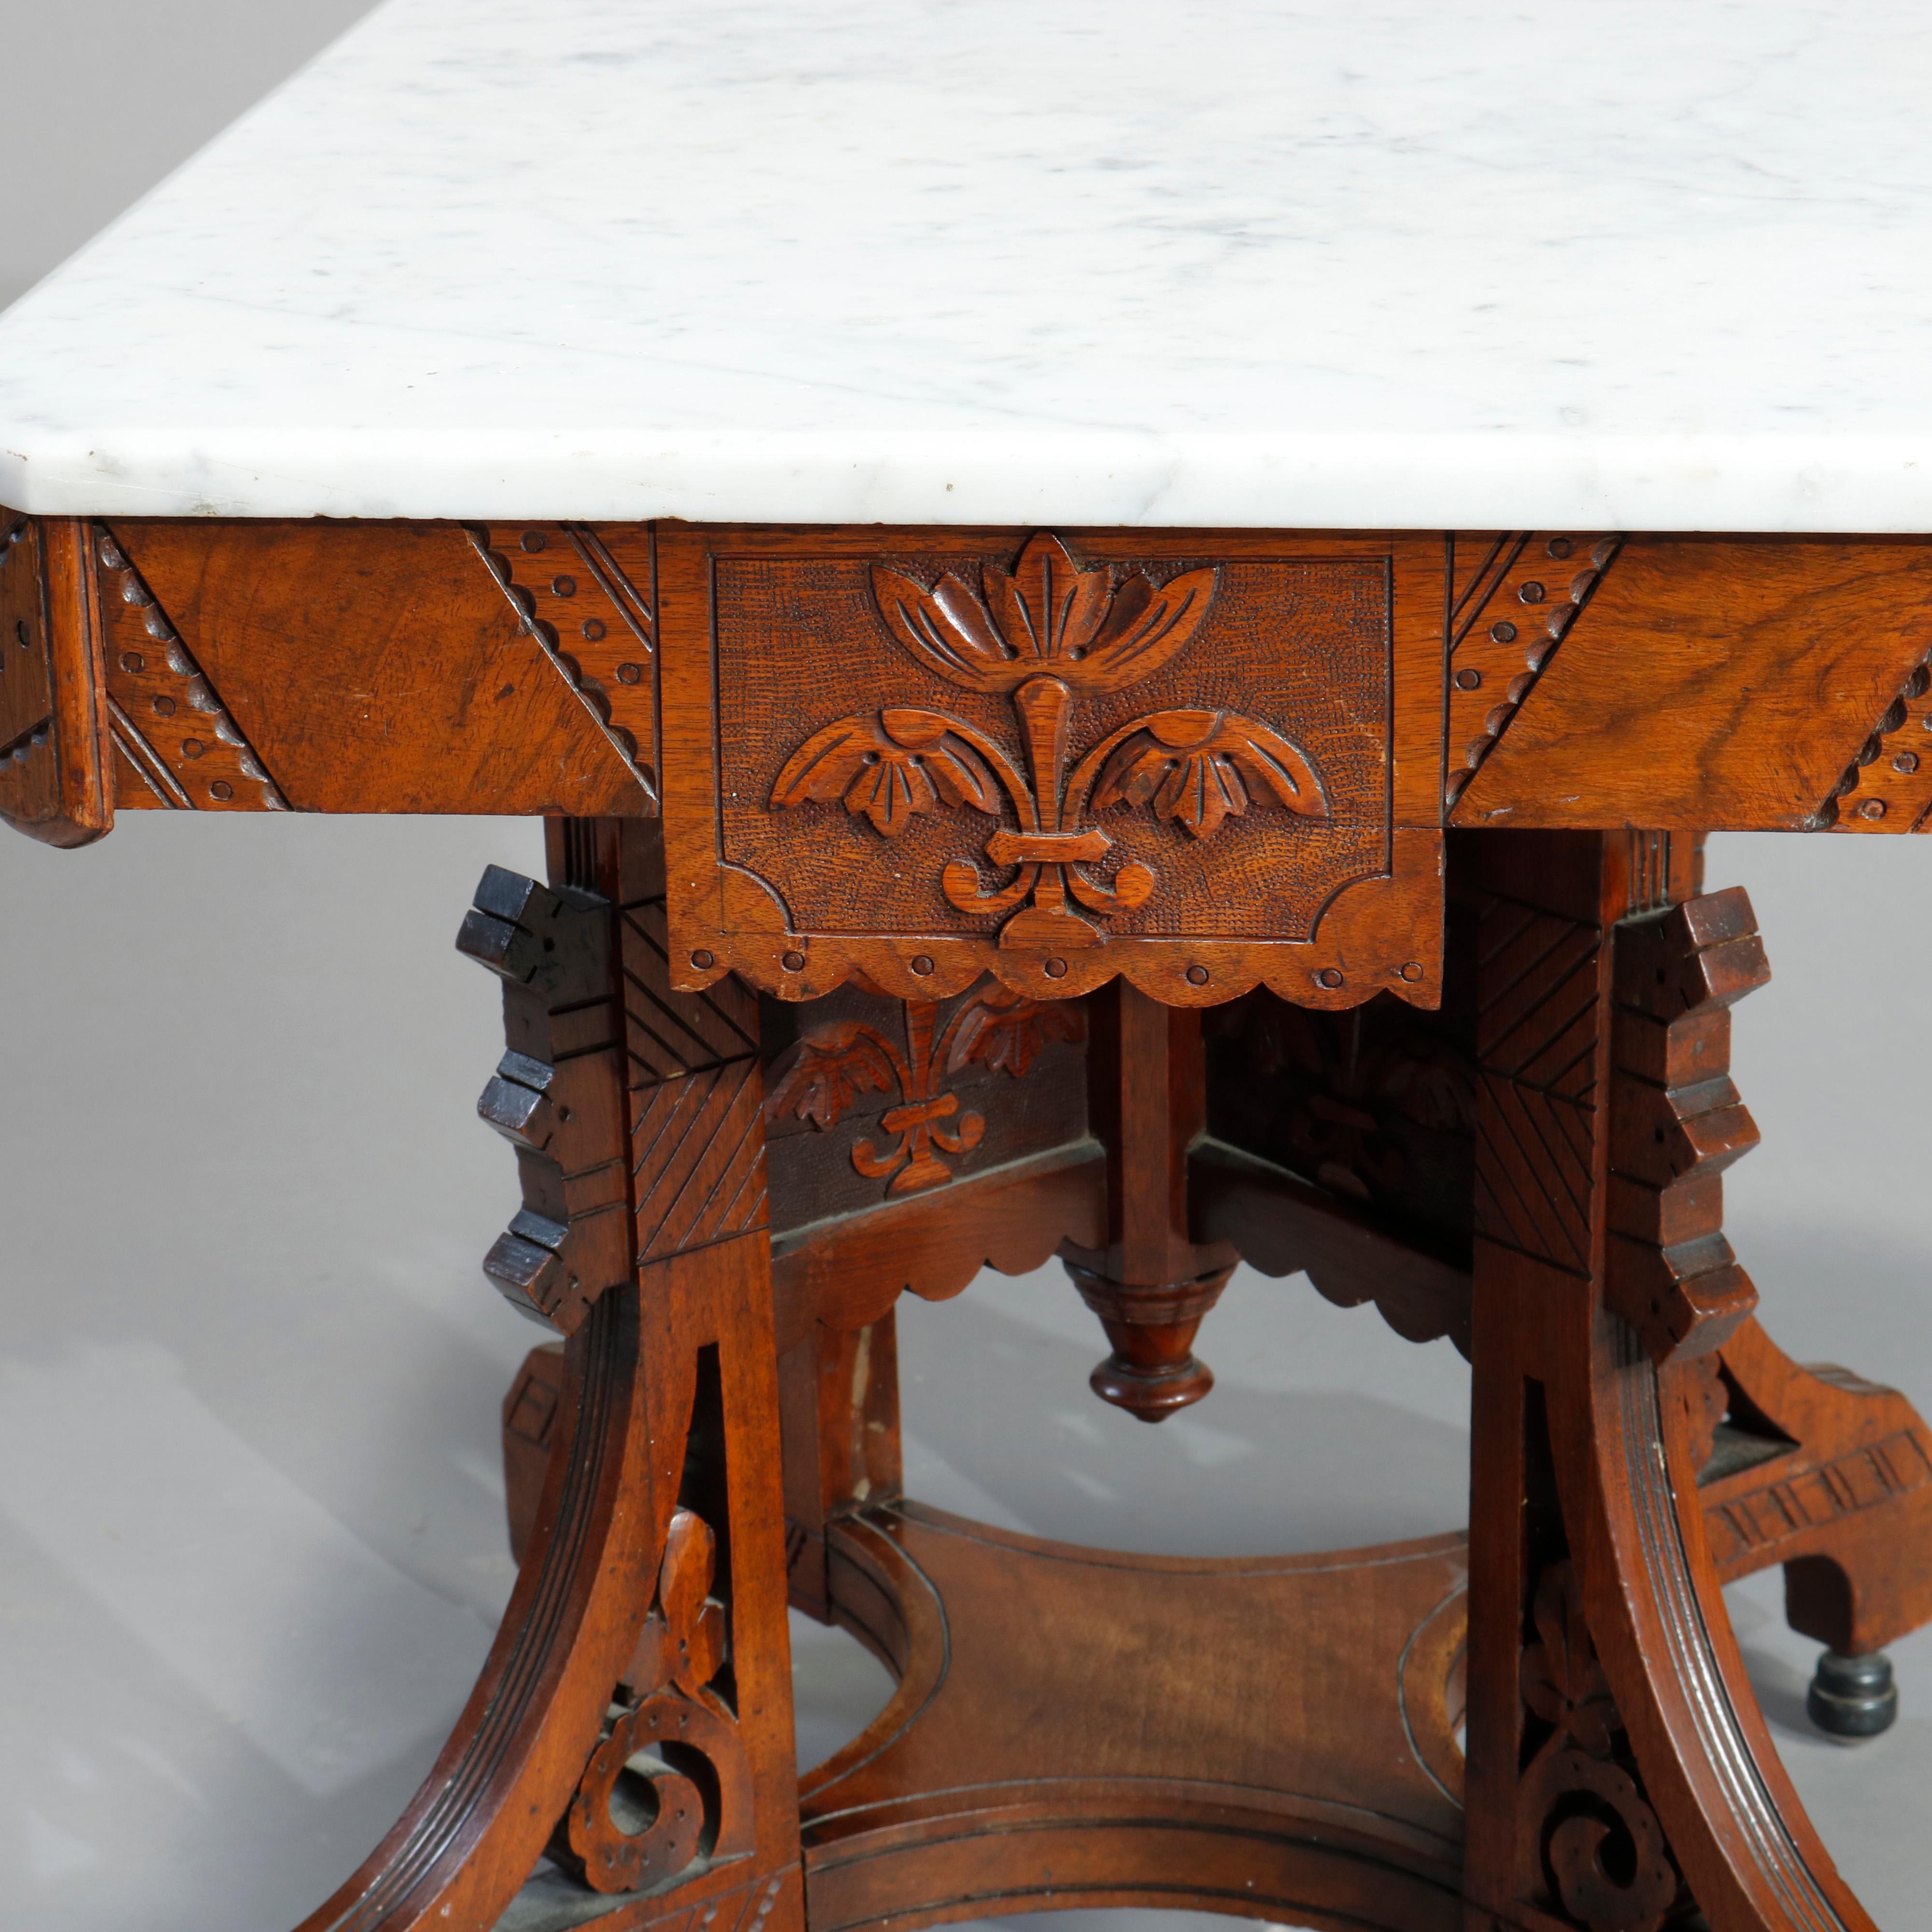 An antique and ornate Eastlake coffee table offers clip-corner marble top surmounting carved rectilinear walnut base having carved stylized floral elements in relief and incised linear decoration, legs with scrolled elements, central drop finial and